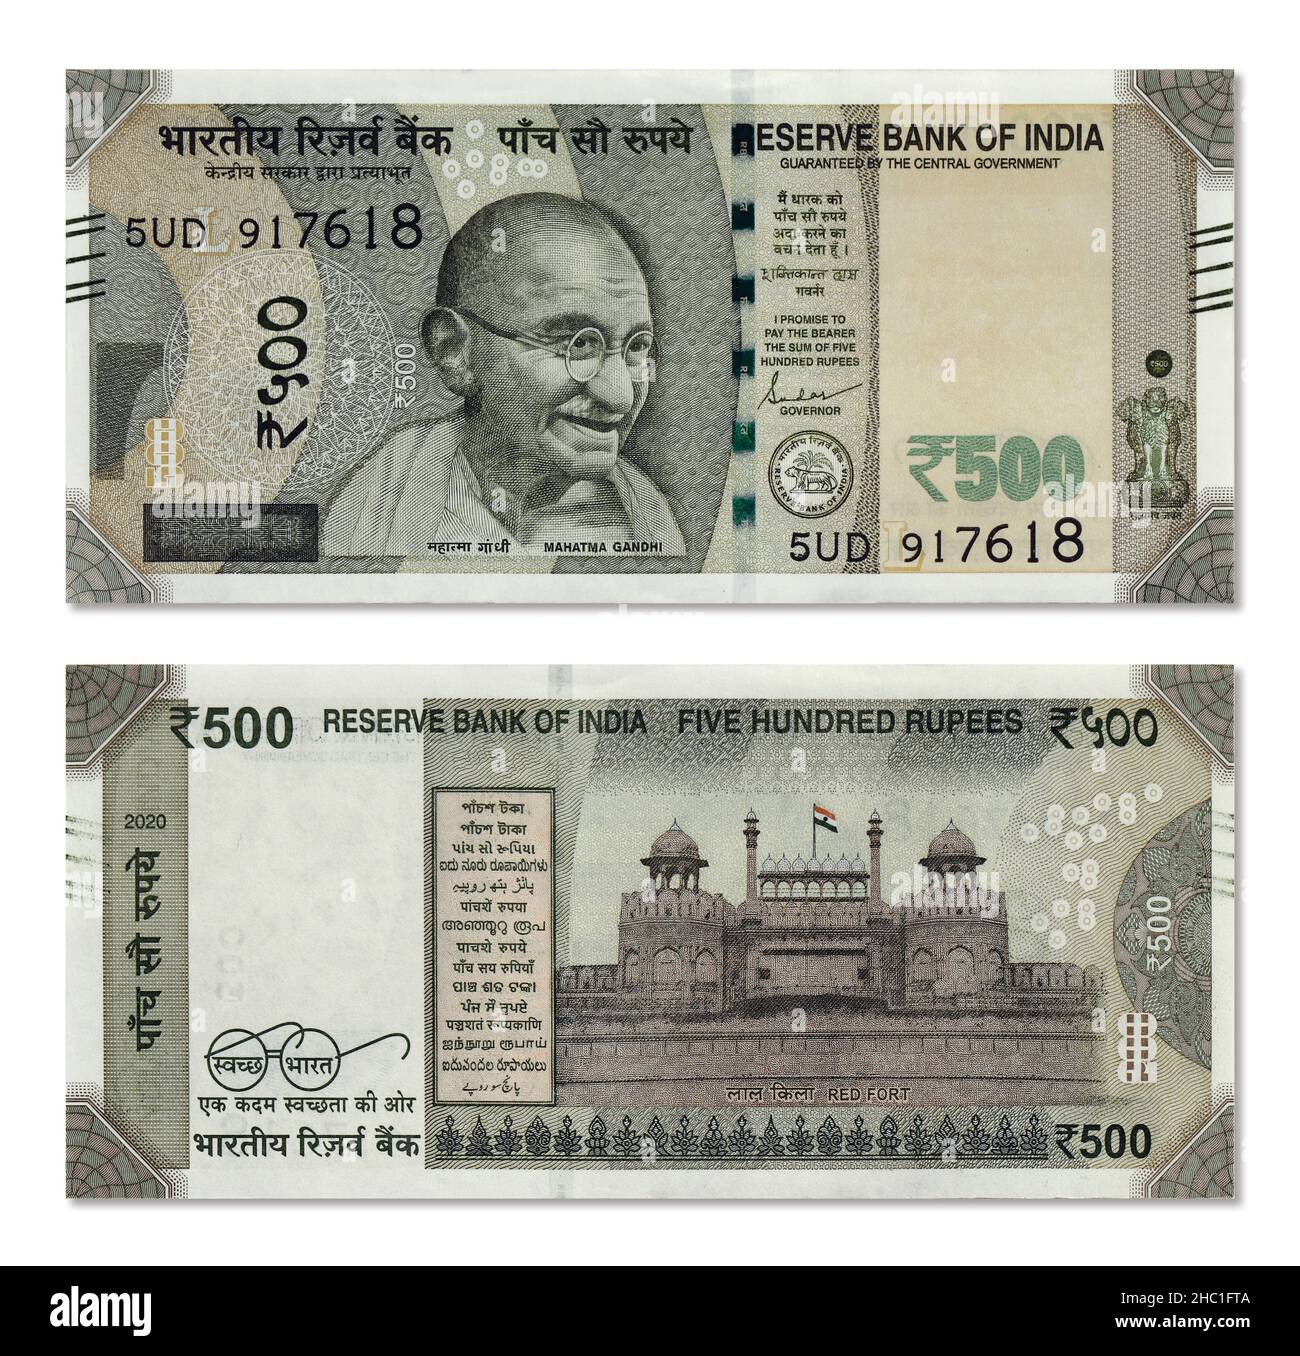 Indian 500 rupee paper currency note front and back side design isolated on white background Stock Photo